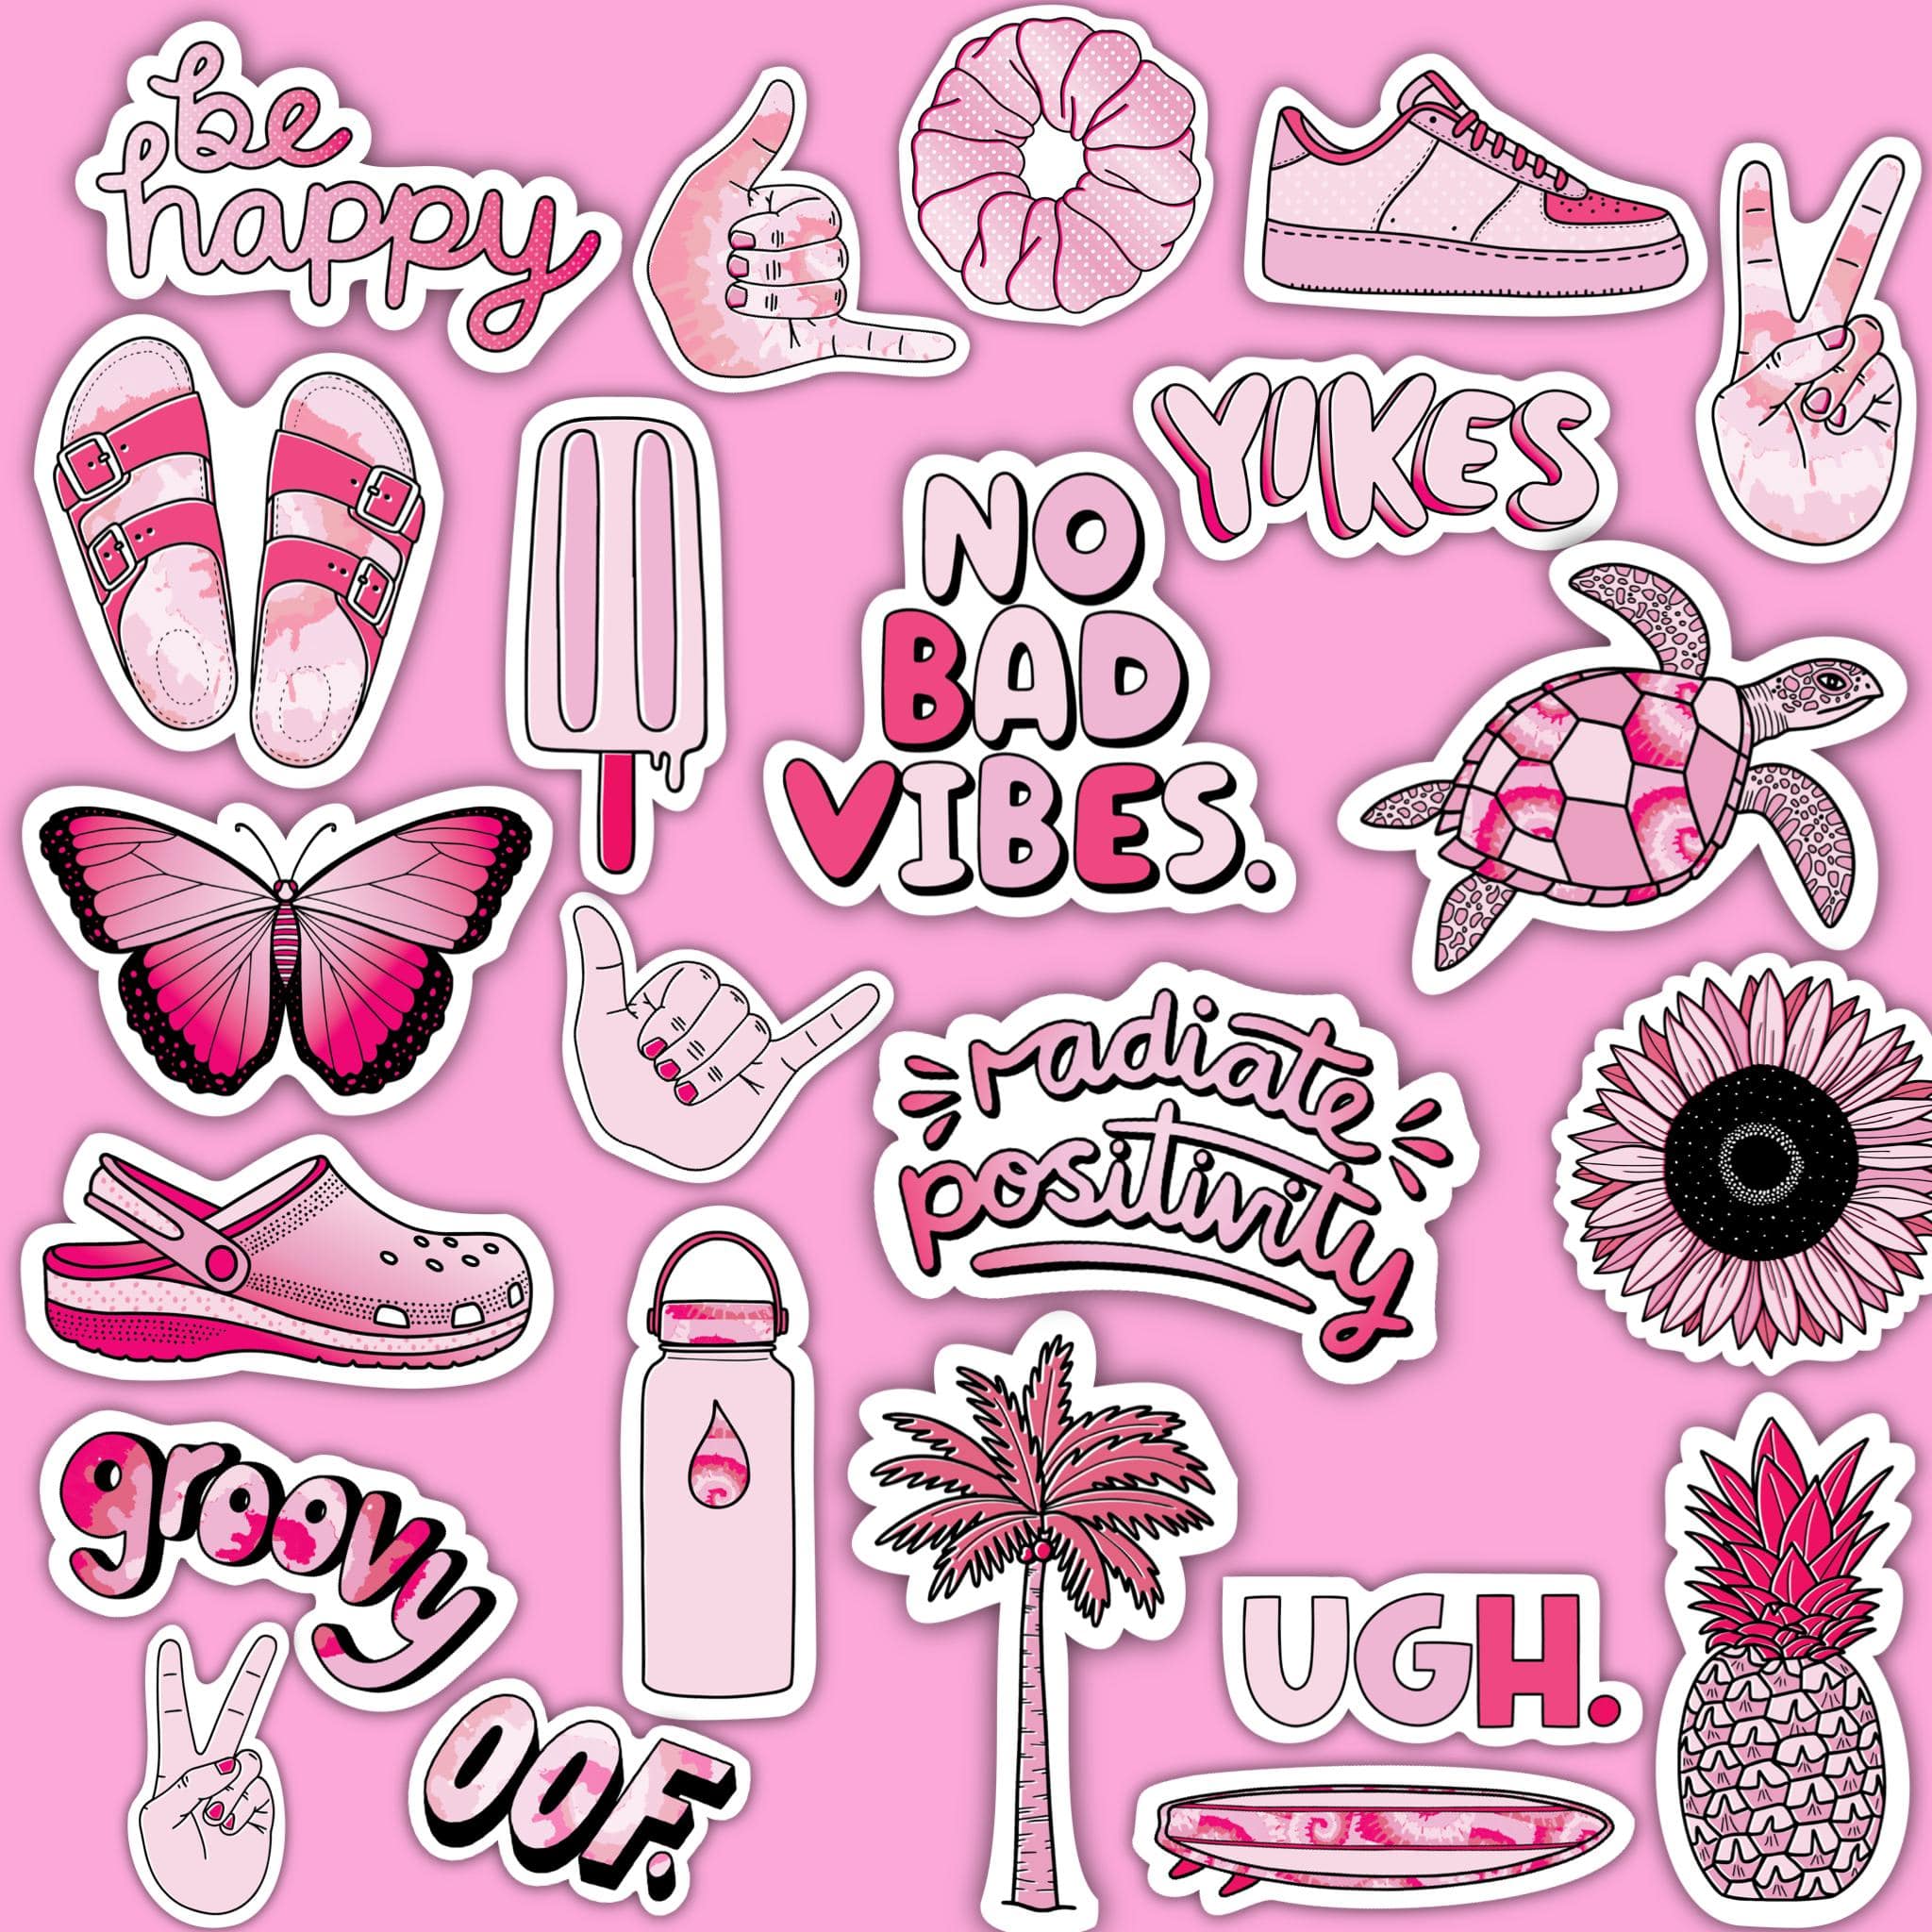 Pink Aesthetic Sticker 23 Pack LARGE 3 x 3